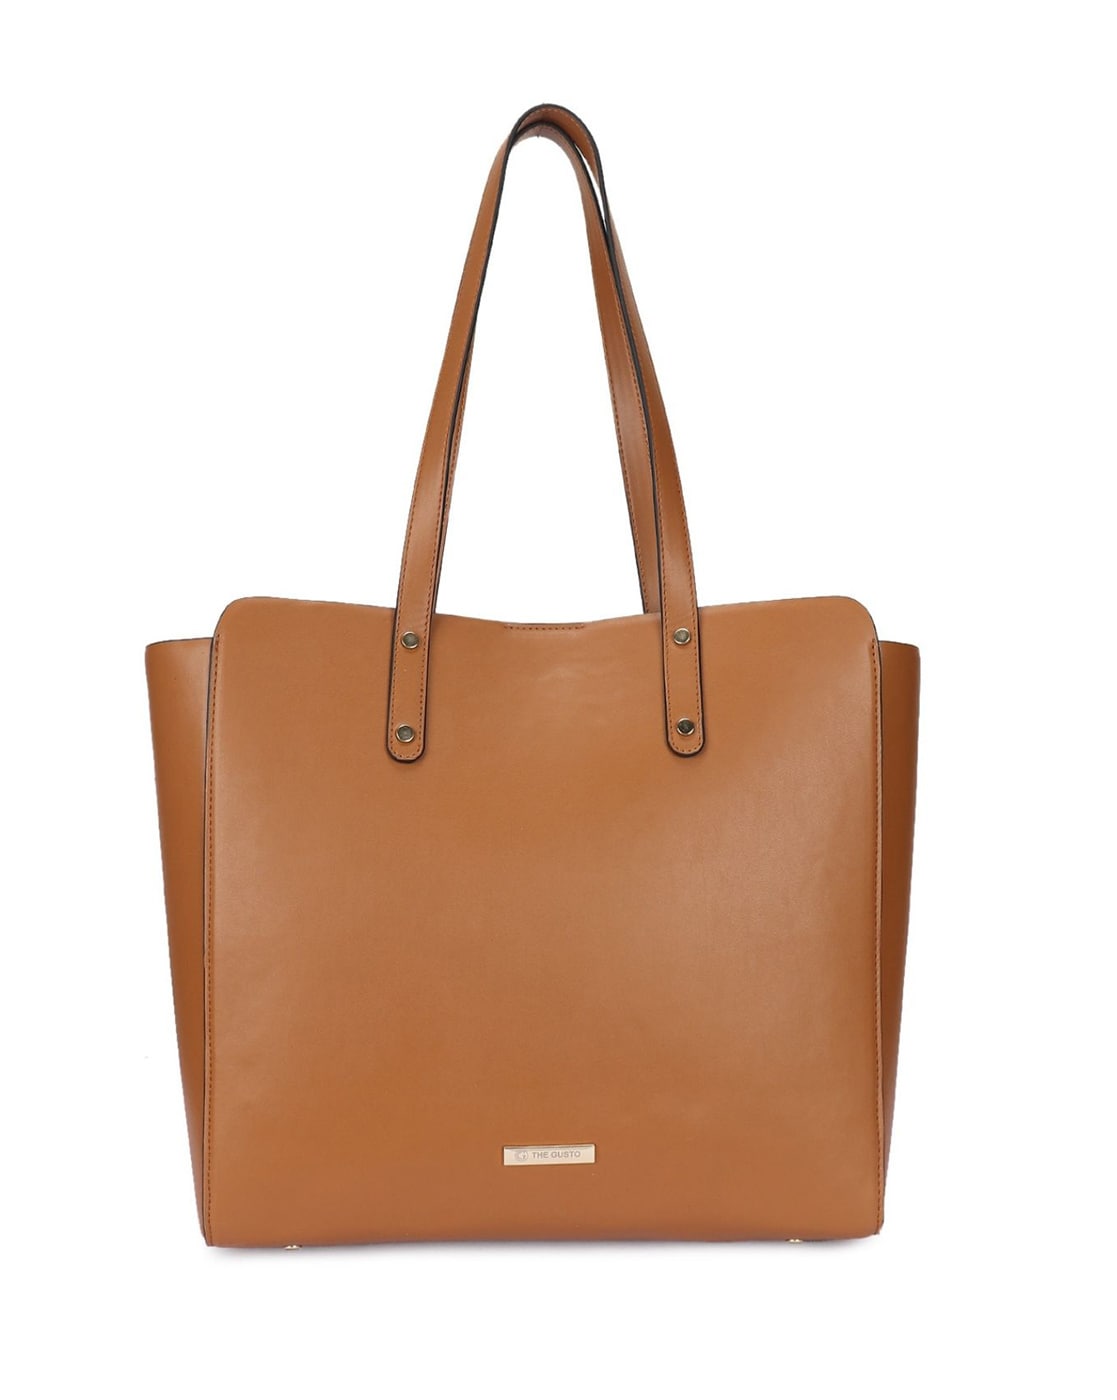 Buy Infinity Tall Tote Online | The Gusto